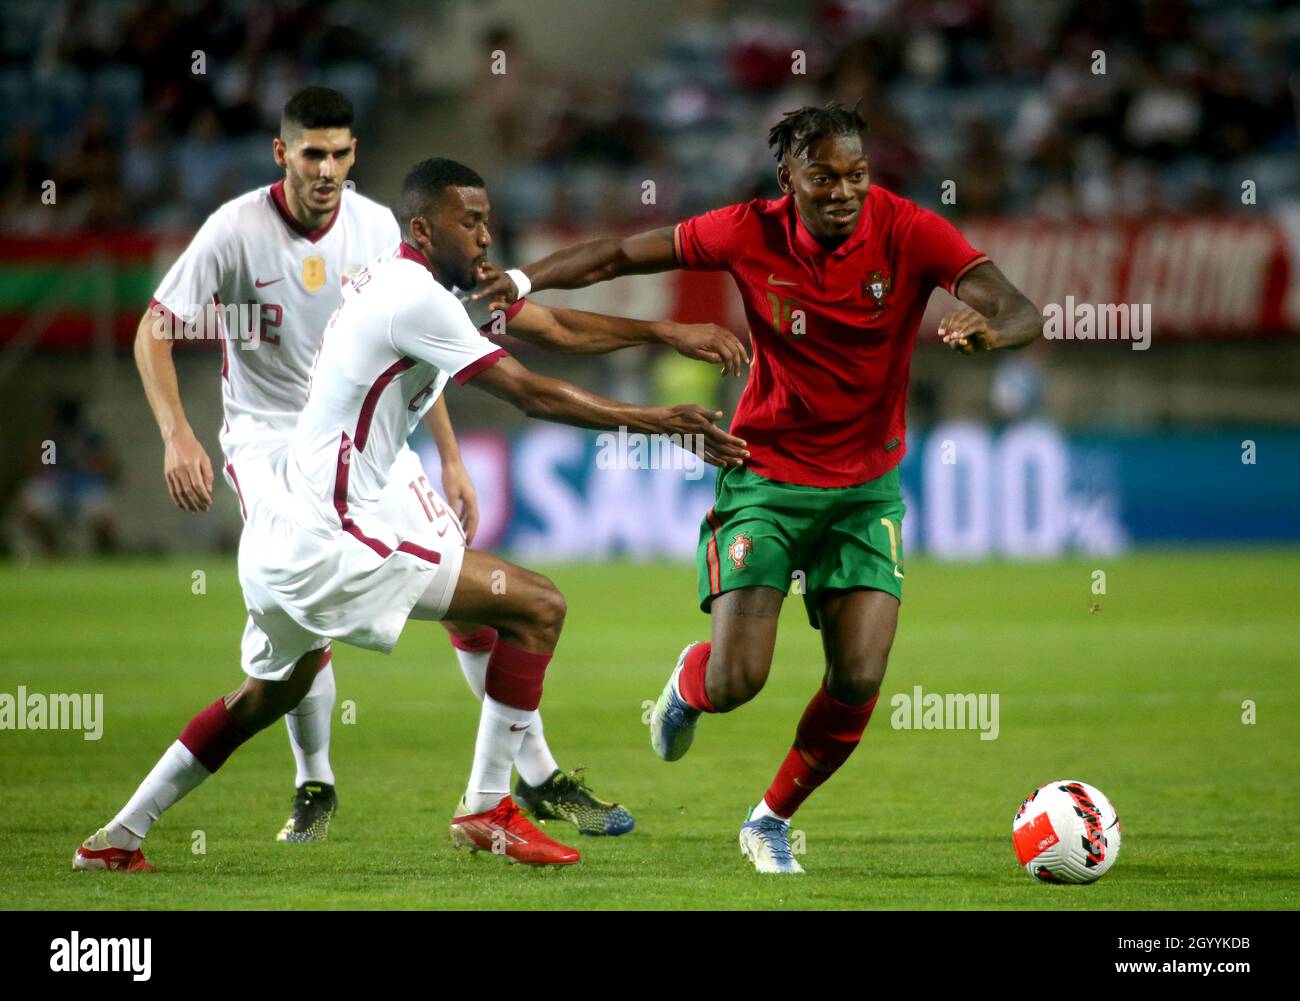 FARO, PORTUGAL - OCTOBER 09: Rafael Leao of Portugal competes for the ball with Abdulaziz Hatem and Karim Boudiaf of Qatar ,during the international friendly match between Portugal and Qatar at Estadio Algarve on October 9, 2021 in Faro, Faro. (Photo by MB Media) Stock Photo